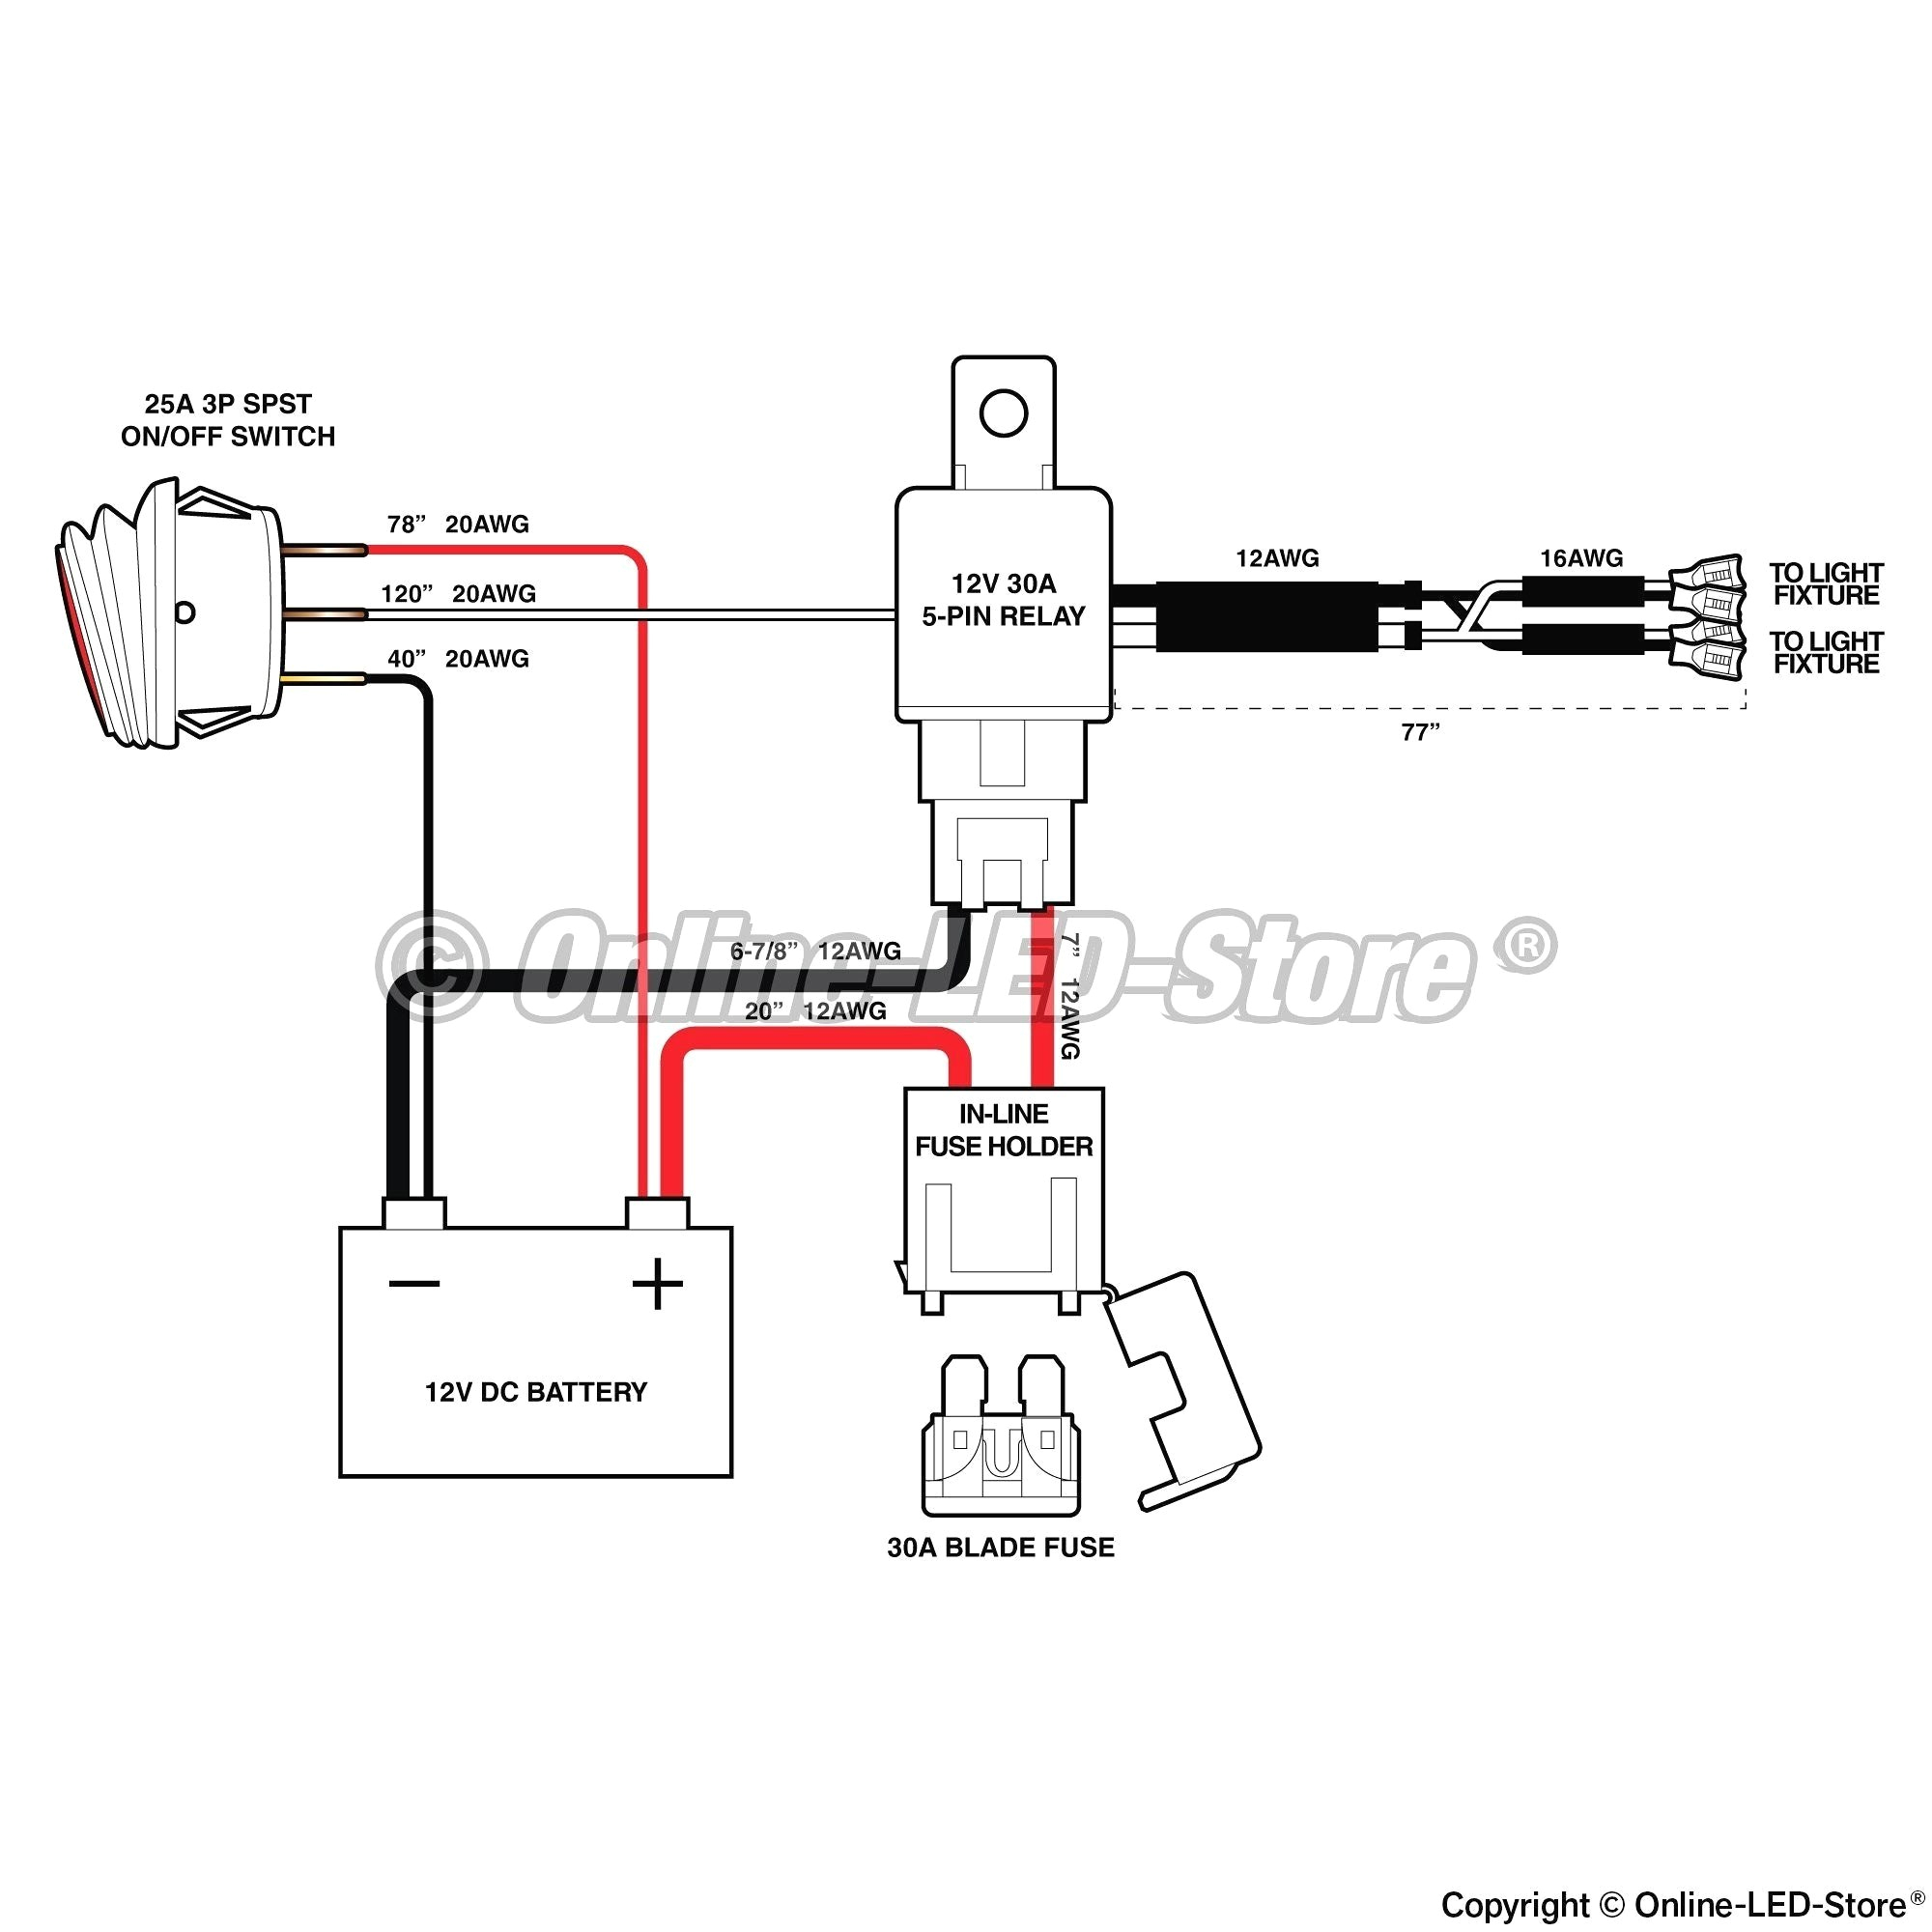 Wiring Diagram for A 4 Pin Relay | autocardesign woofers wiring diagrams for 